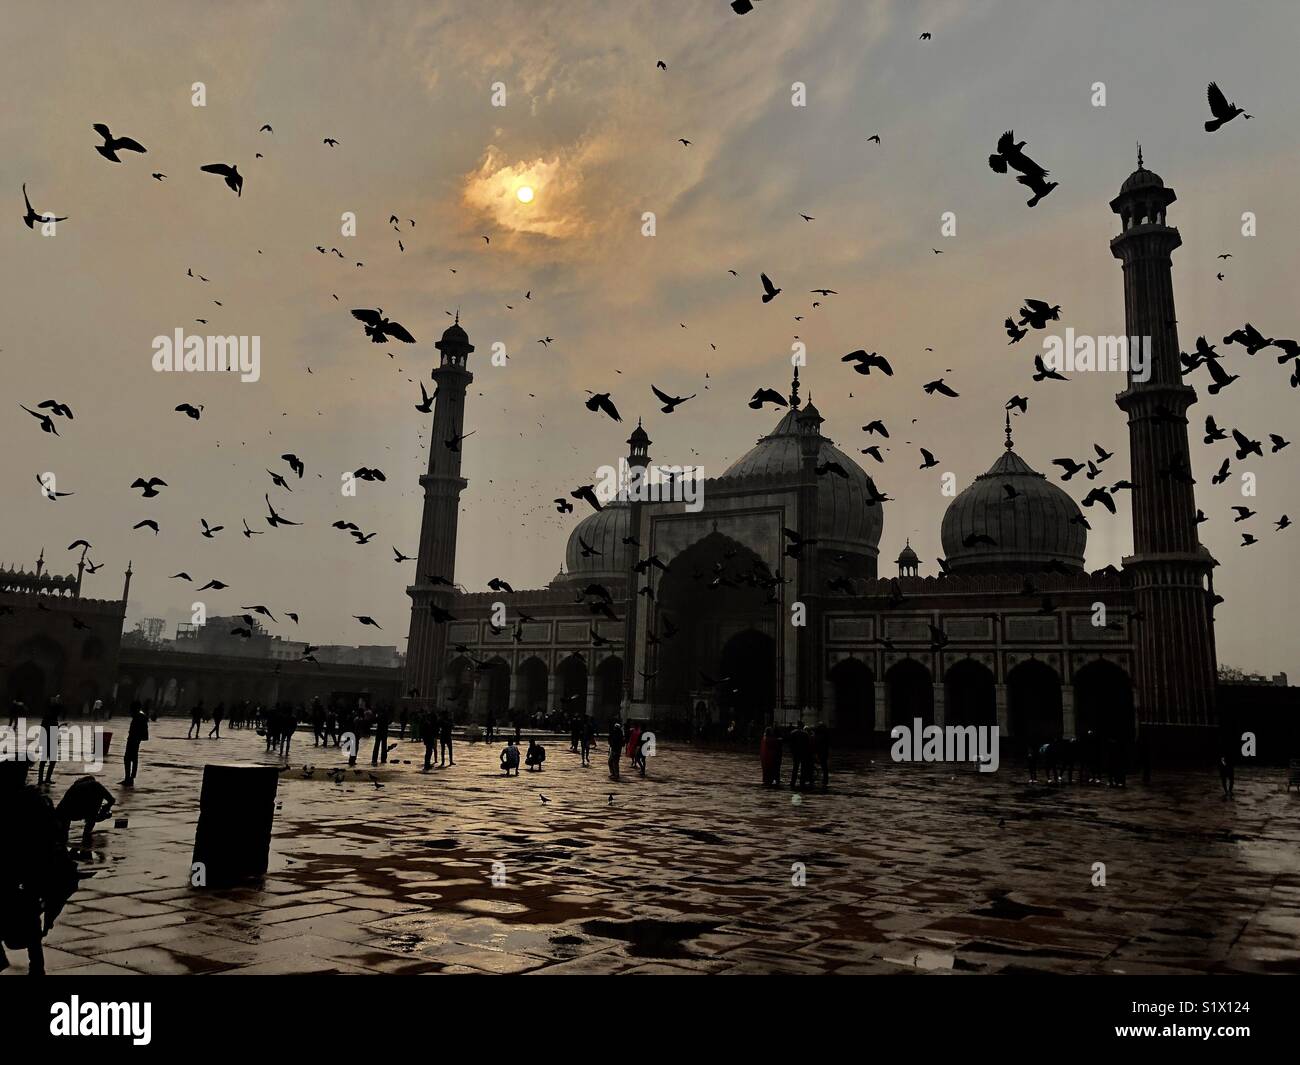 Sunset,cloudy and birds flying view of Historical "Jama masjid"Delhi ,India Stock Photo